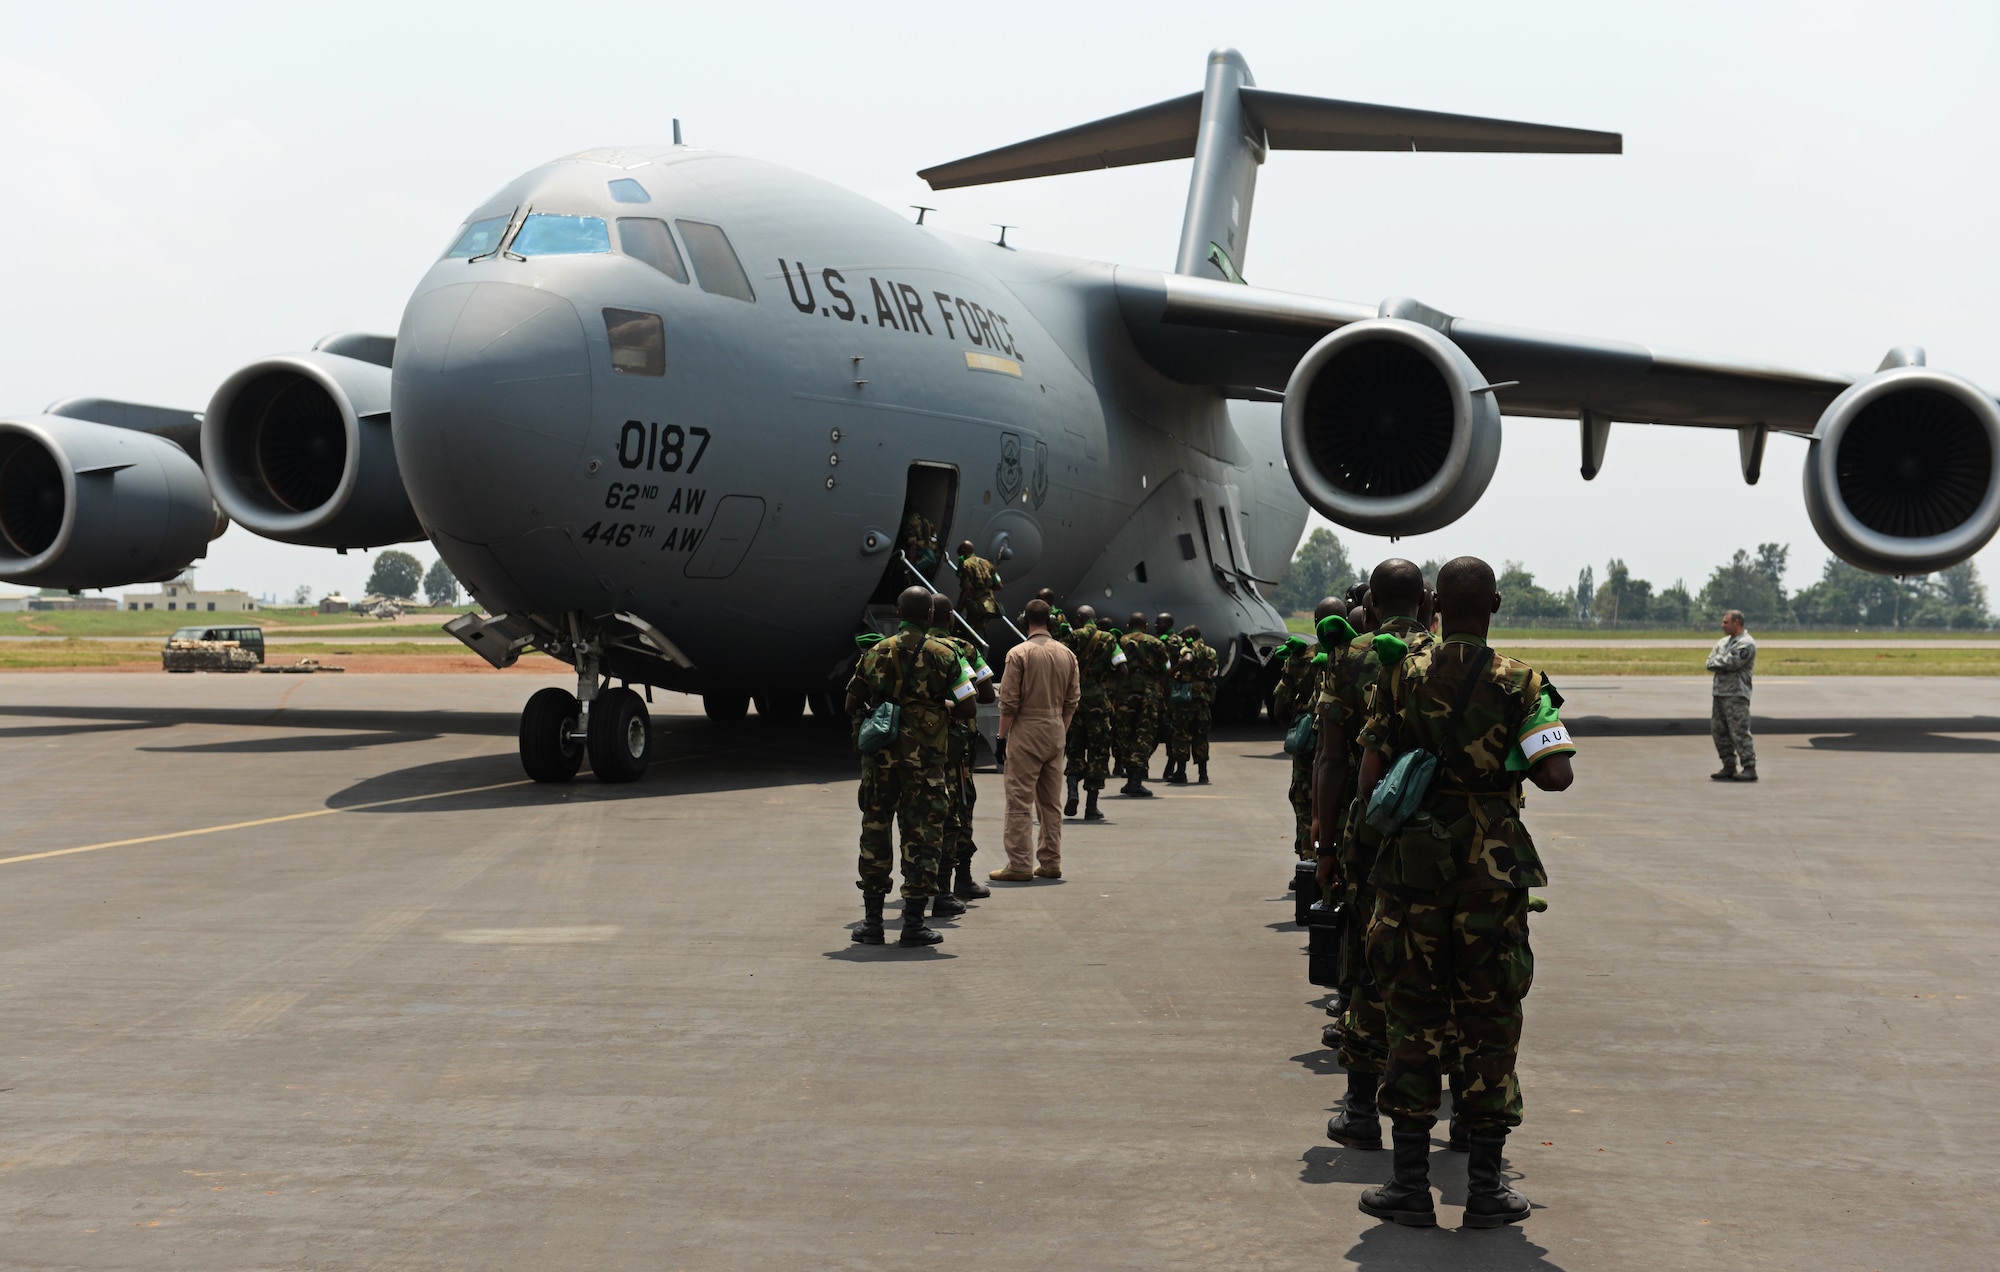 Rwandan soldiers wait in line at the Kigali airport to get on a C-17 Globemaster III based out of McChord Air Force Base, Wash., Jan. 19, 2014. U.S. forces will transport a total number of 850 Rwandan soldiers and more than 1,000 tons of equipment into the Central African Republic to aid French and African Union operations against militants during this three weeklong operation. (U.S. Air Force photo/ Staff Sgt. Ryan Crane)